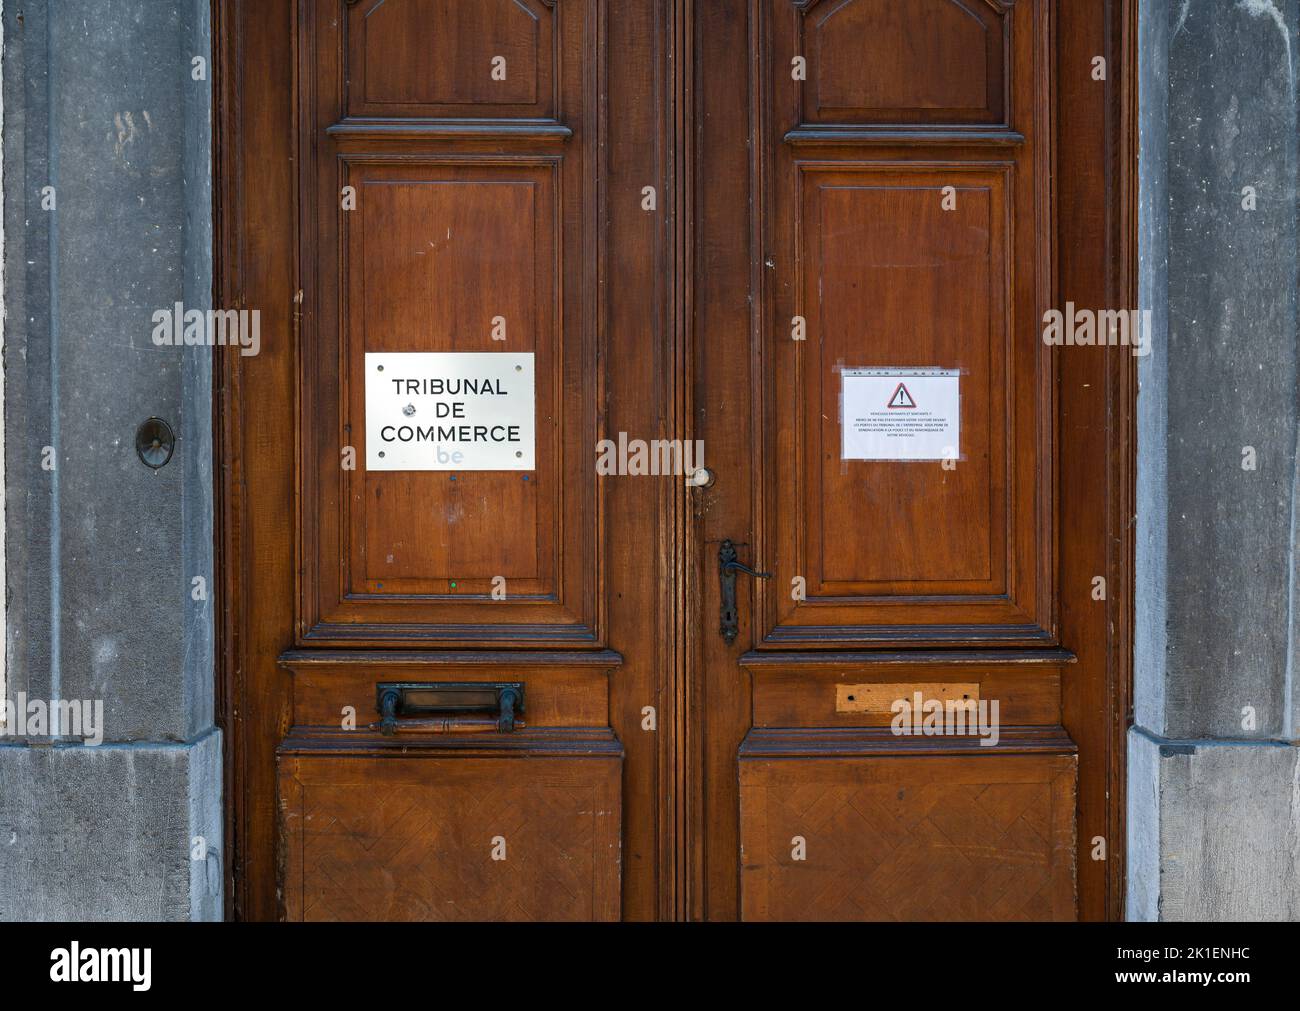 Namur, Wallon Region, Belgium, 07 28 2022 - Wooden entrance door of the Commercial court house with a message restricting parking and tow away rules Stock Photo